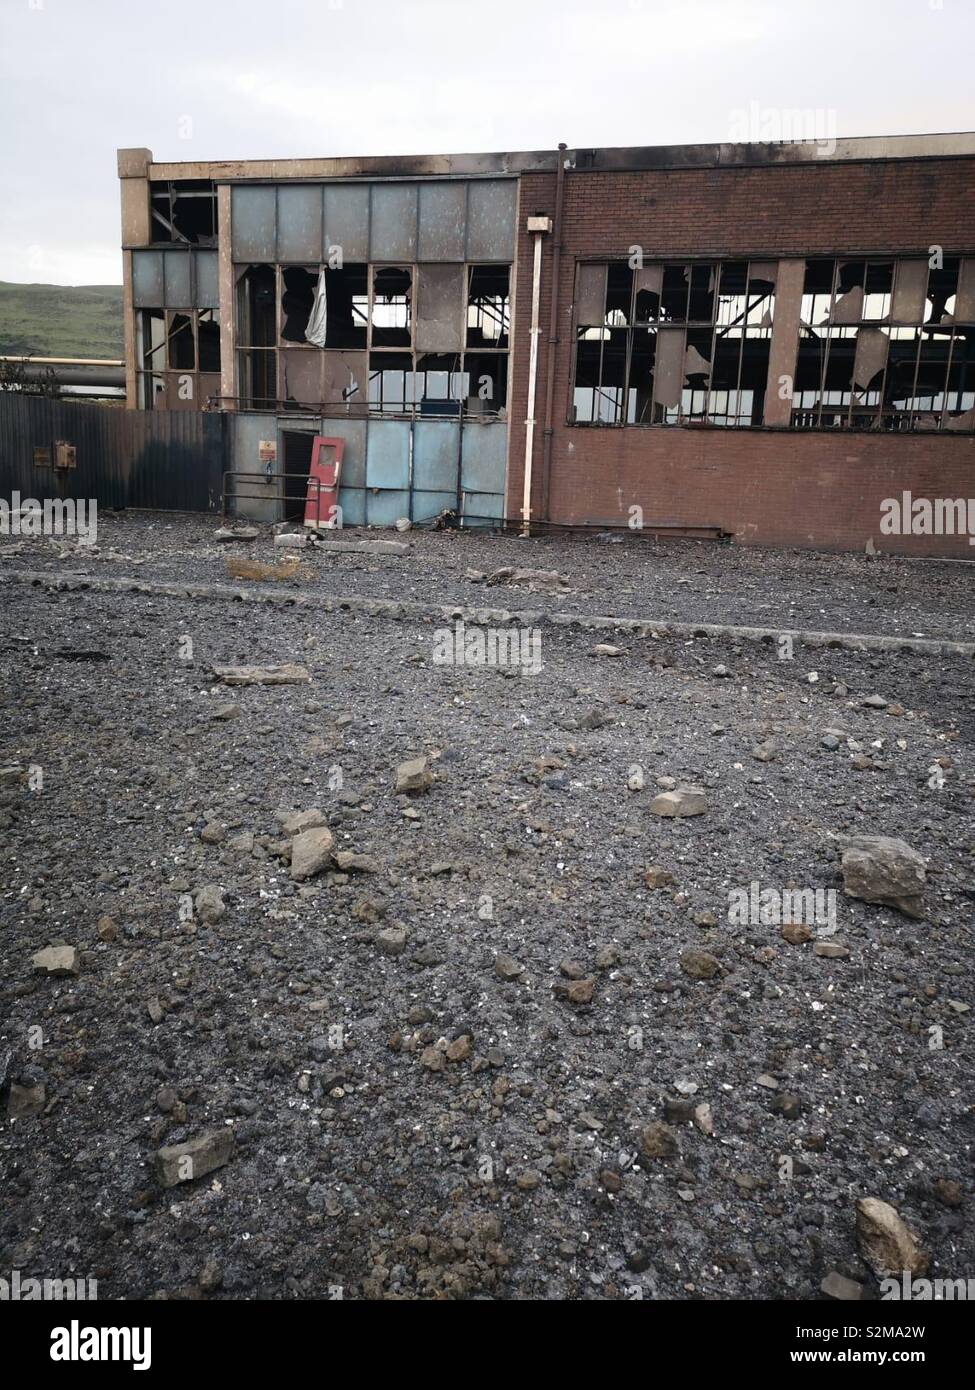 Port talbot aftermath after explosion Stock Photo